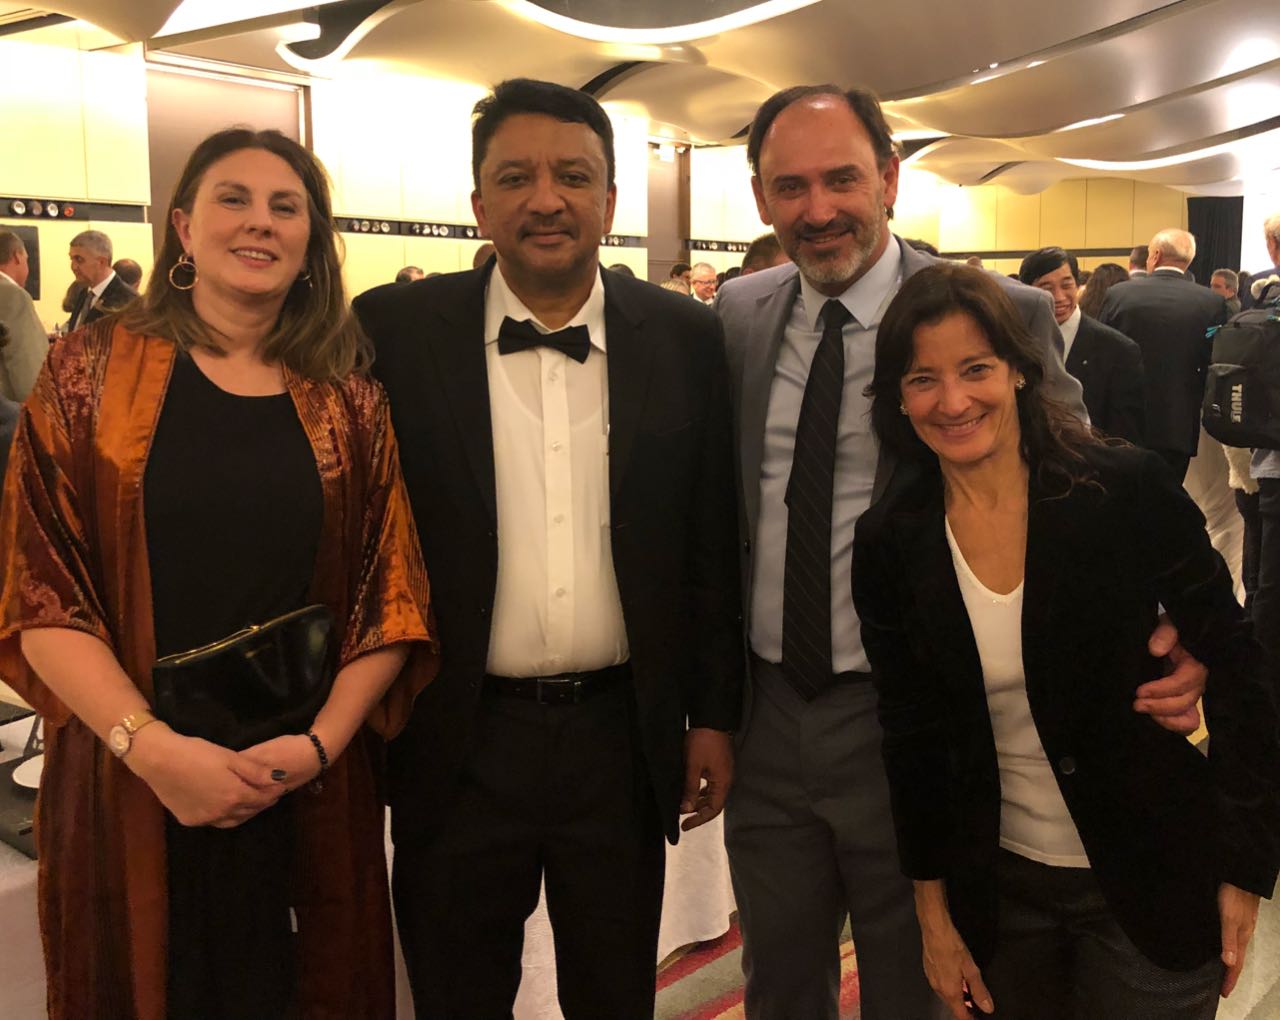 Dr Sm Balaji With Dr Maricel Marini, Department Of Oral And Maxillofacial Department, University Of Buenos Aires, Prof Sergio Gotta, Head Of The Department Of Oral And Maxillofacial Surgery, University Of Buenos Aires And Dr Victoria Pezza, Head Of The Department Of Oral And Maxillofacial Surgeon, Aleman Hospital, Buenos Aires At The Inauguration Ceremony Of The Fdi Annual World Dental Conference In Buenos Aires